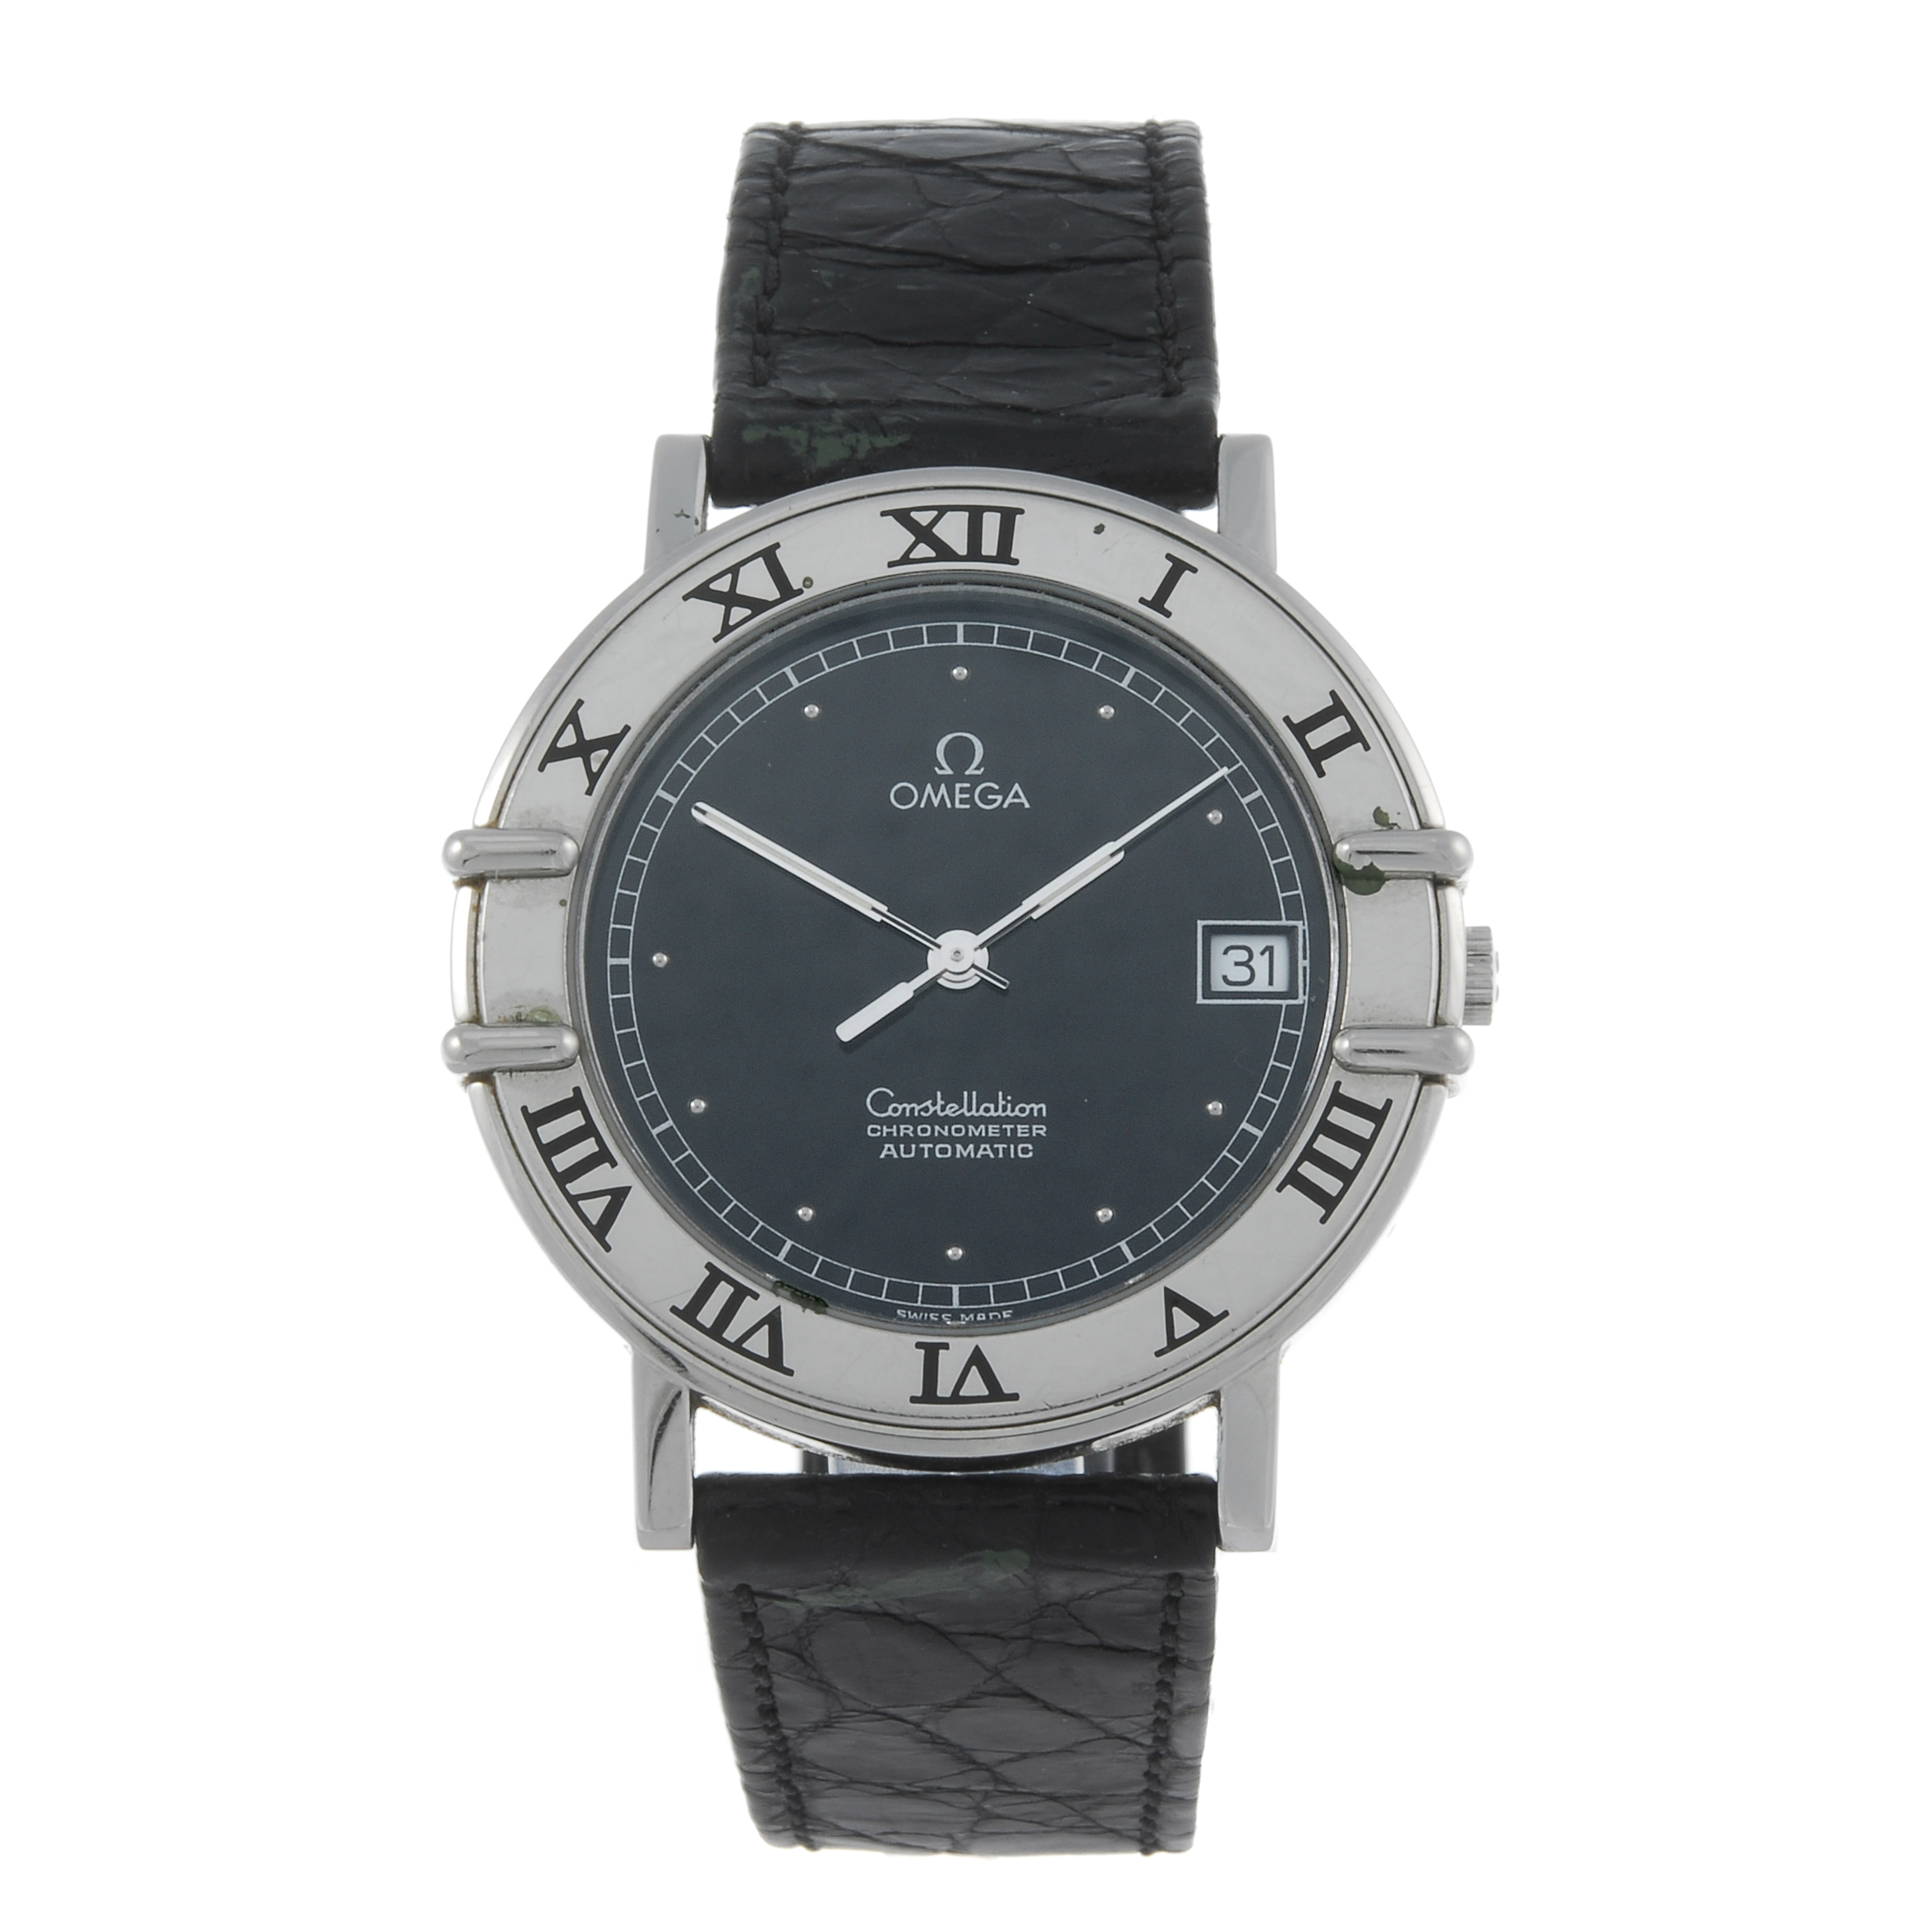 OMEGA - a gentleman's Constellation wrist watch. Stainless steel case with exhibition case back